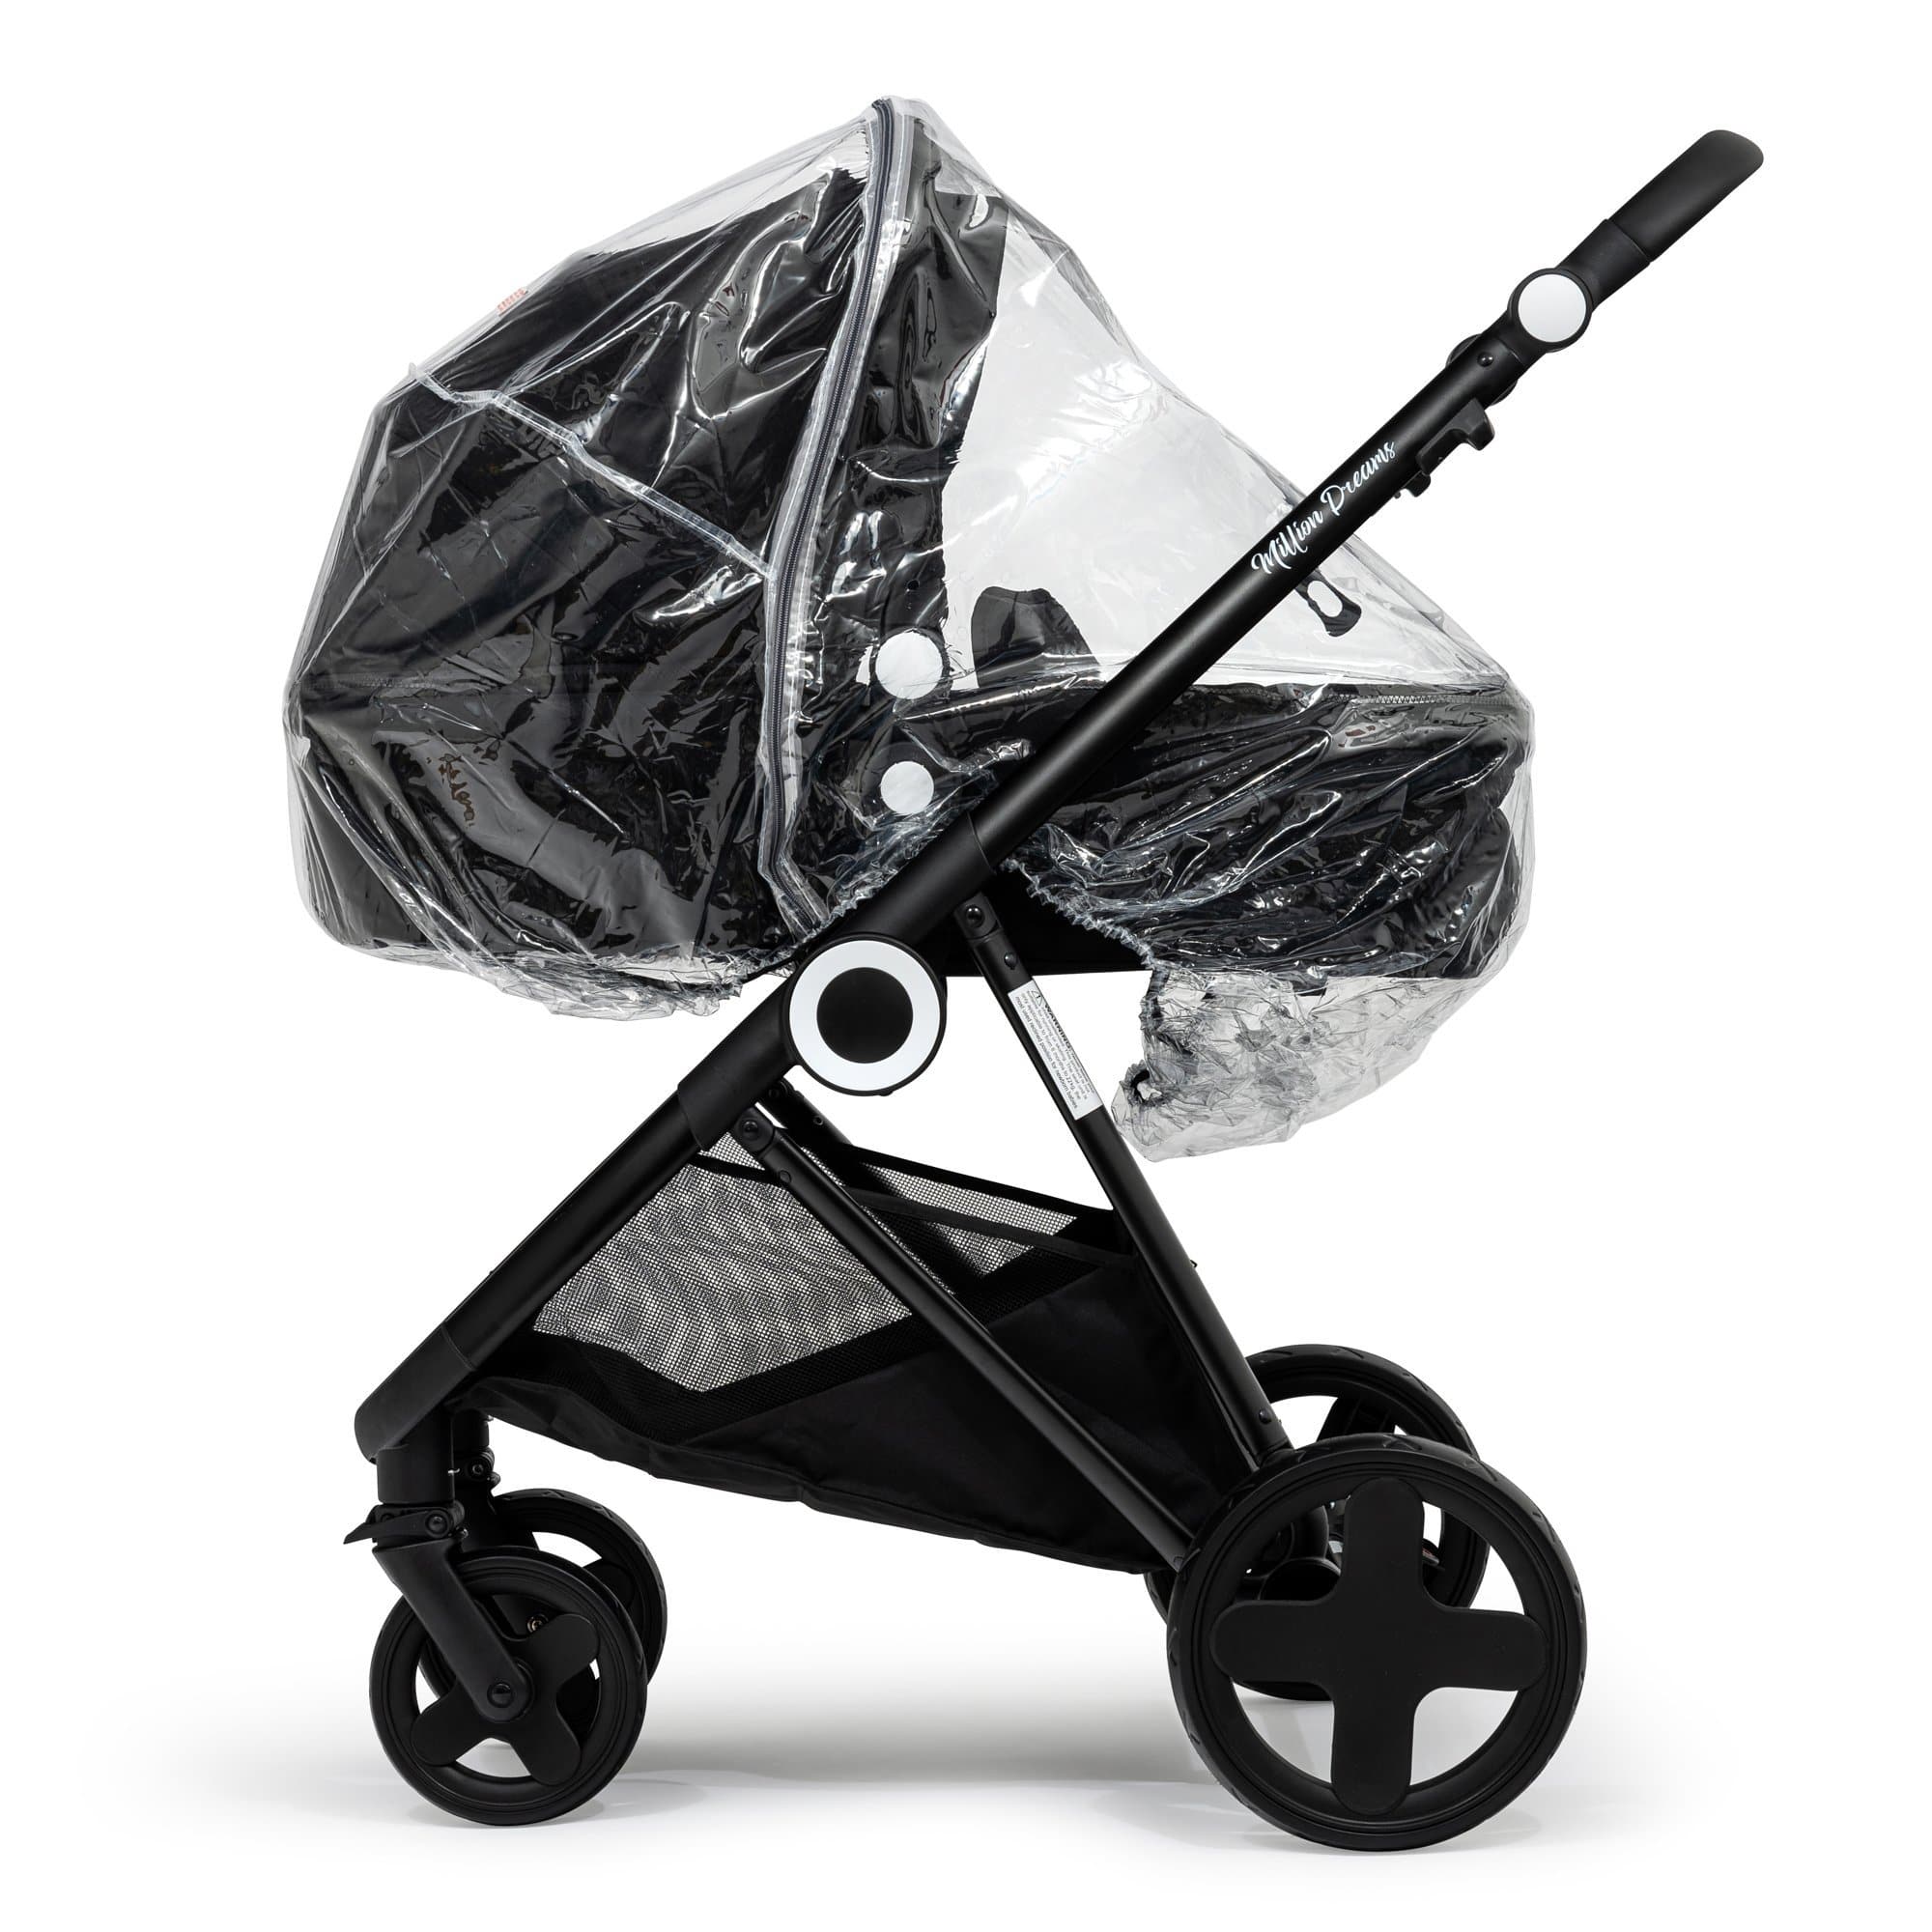 2 in 1 Rain Cover Compatible with Peg Perego - Fits All Models - For Your Little One